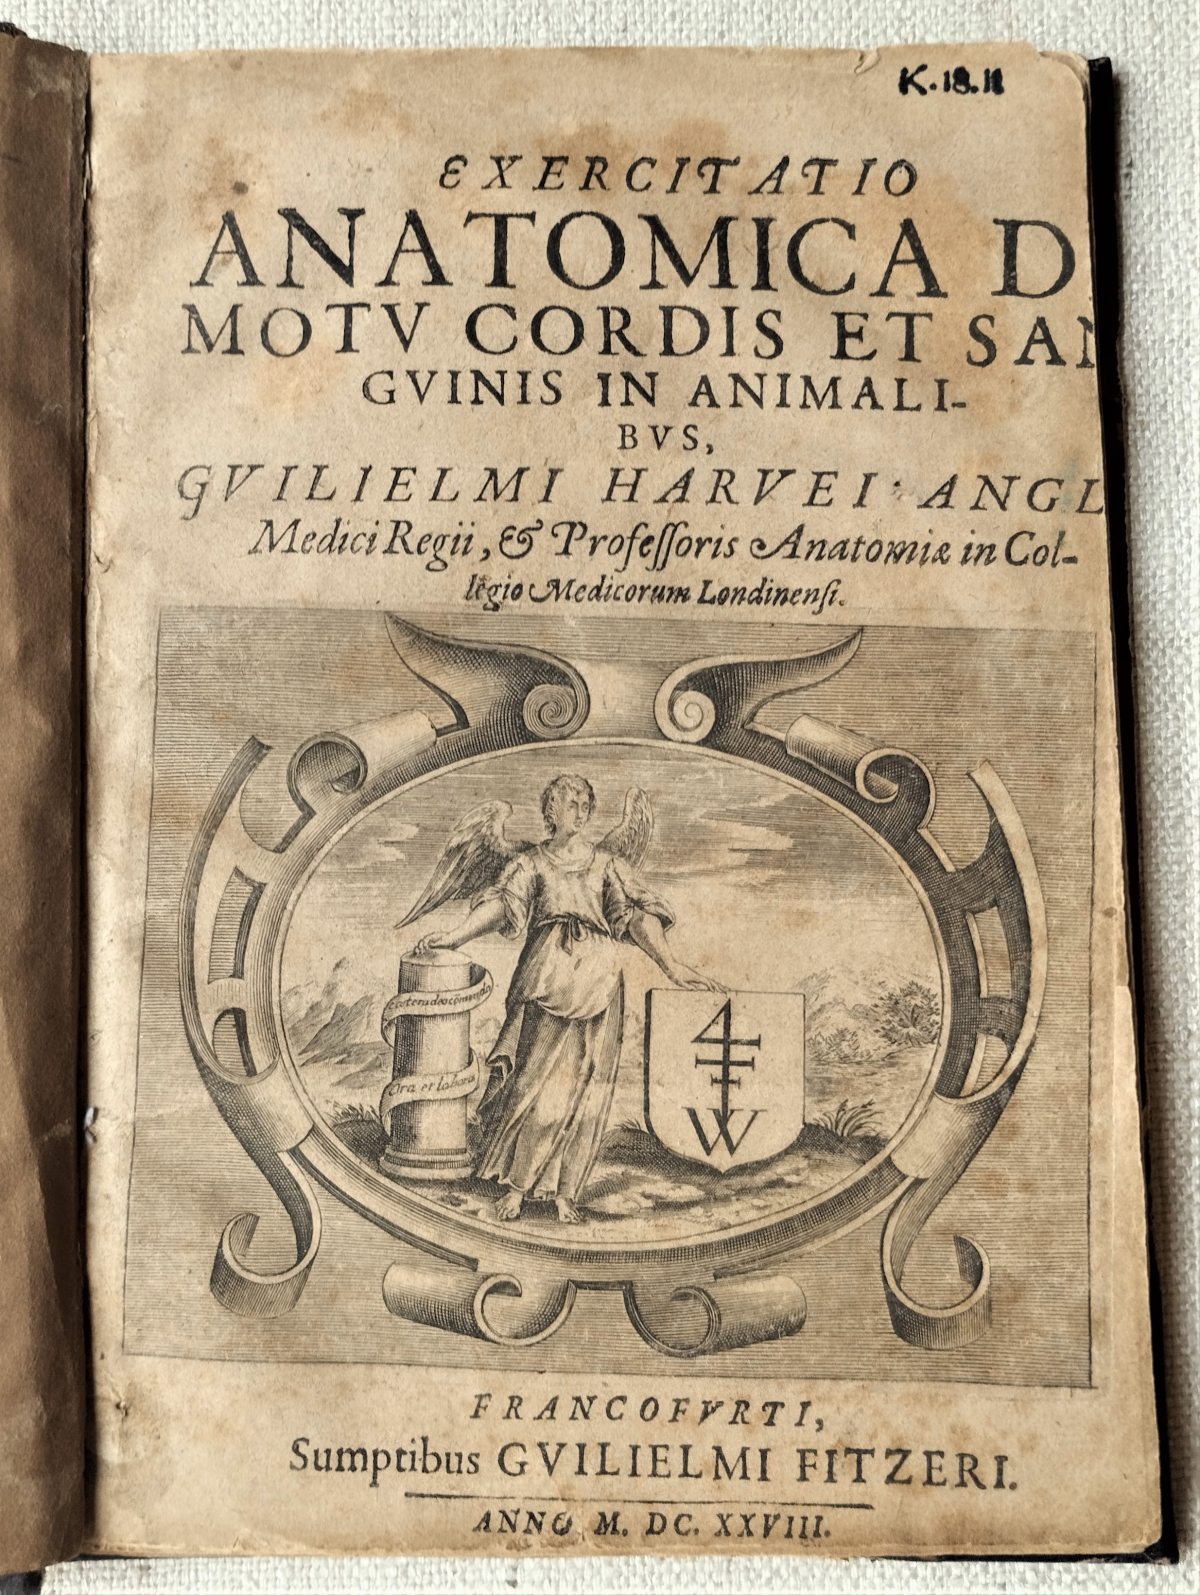 Ttile page of the book "Exercitatio anatomica de motu cordis et sanquinis in animalibus" by William Harvey (1628). It contains an engraved illustration of an angel showing a coat of arm and a column with a latin motto on it.